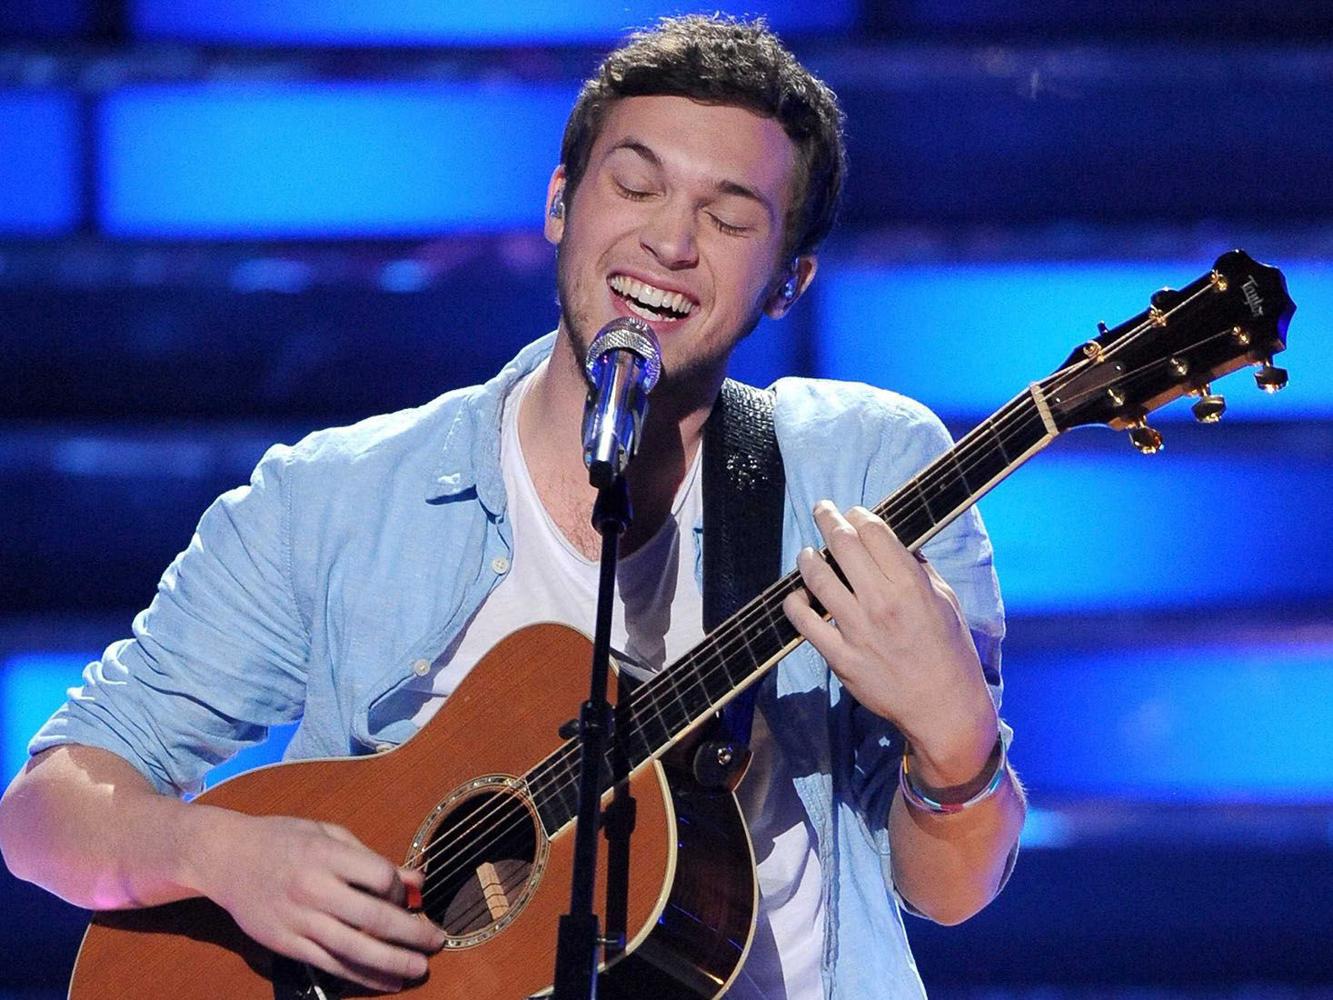 We rank 'American Idol' winners from least to most successful